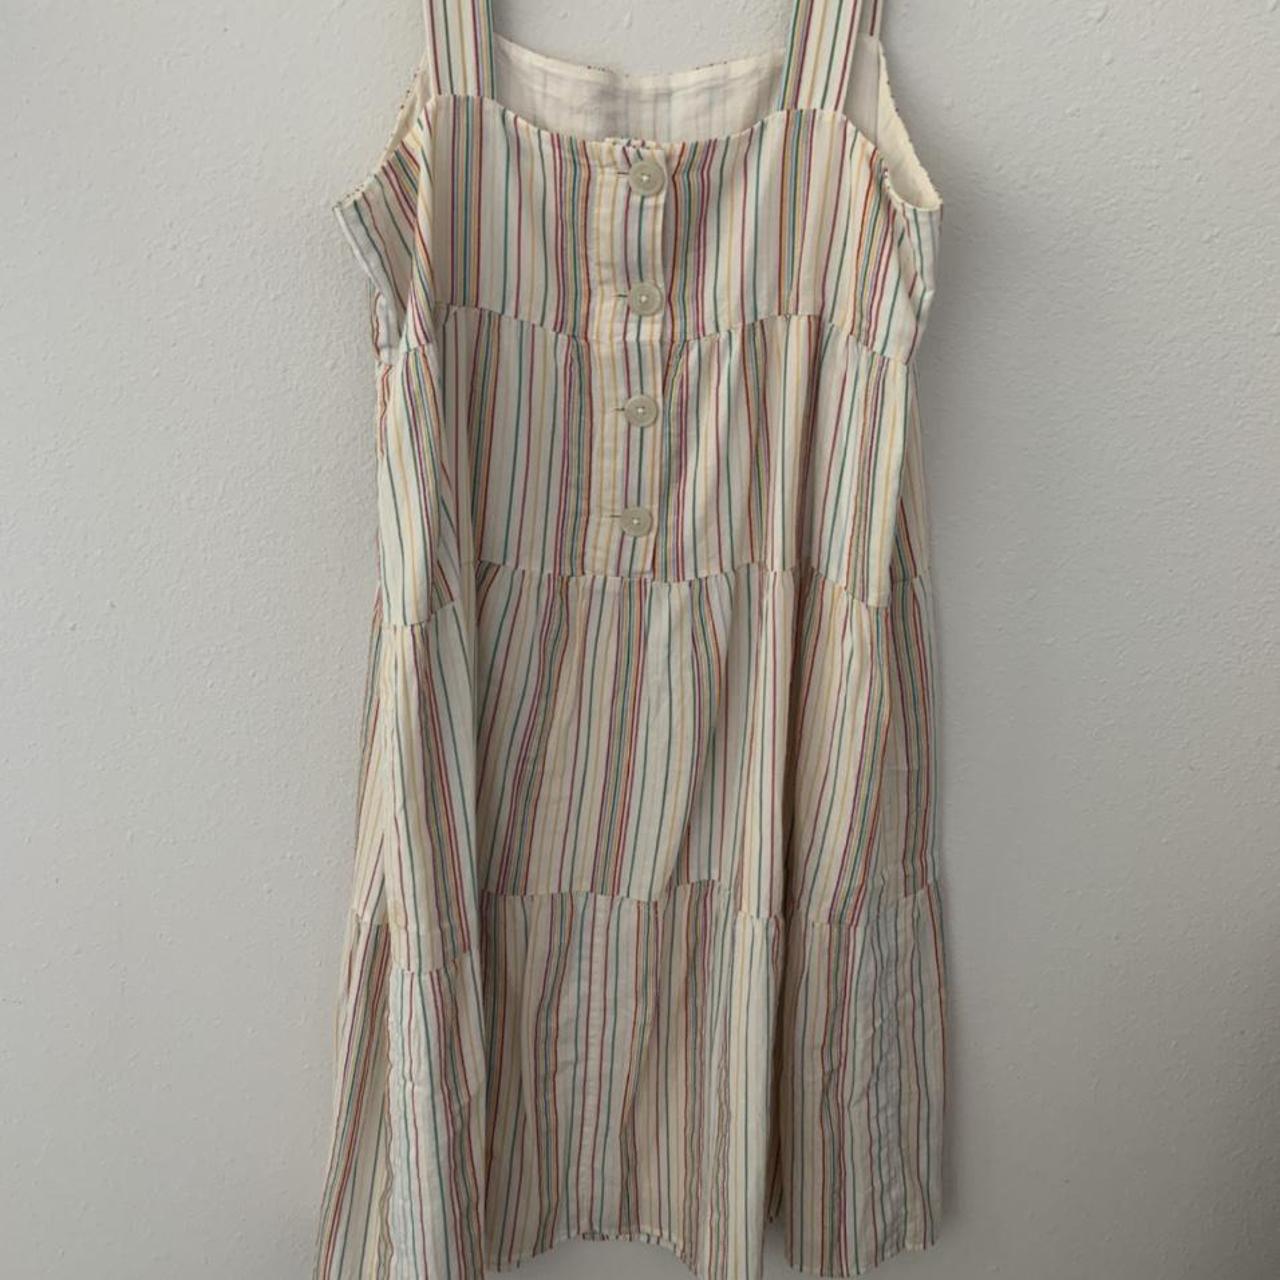 Product Image 4 - madewell white with rainbow striped